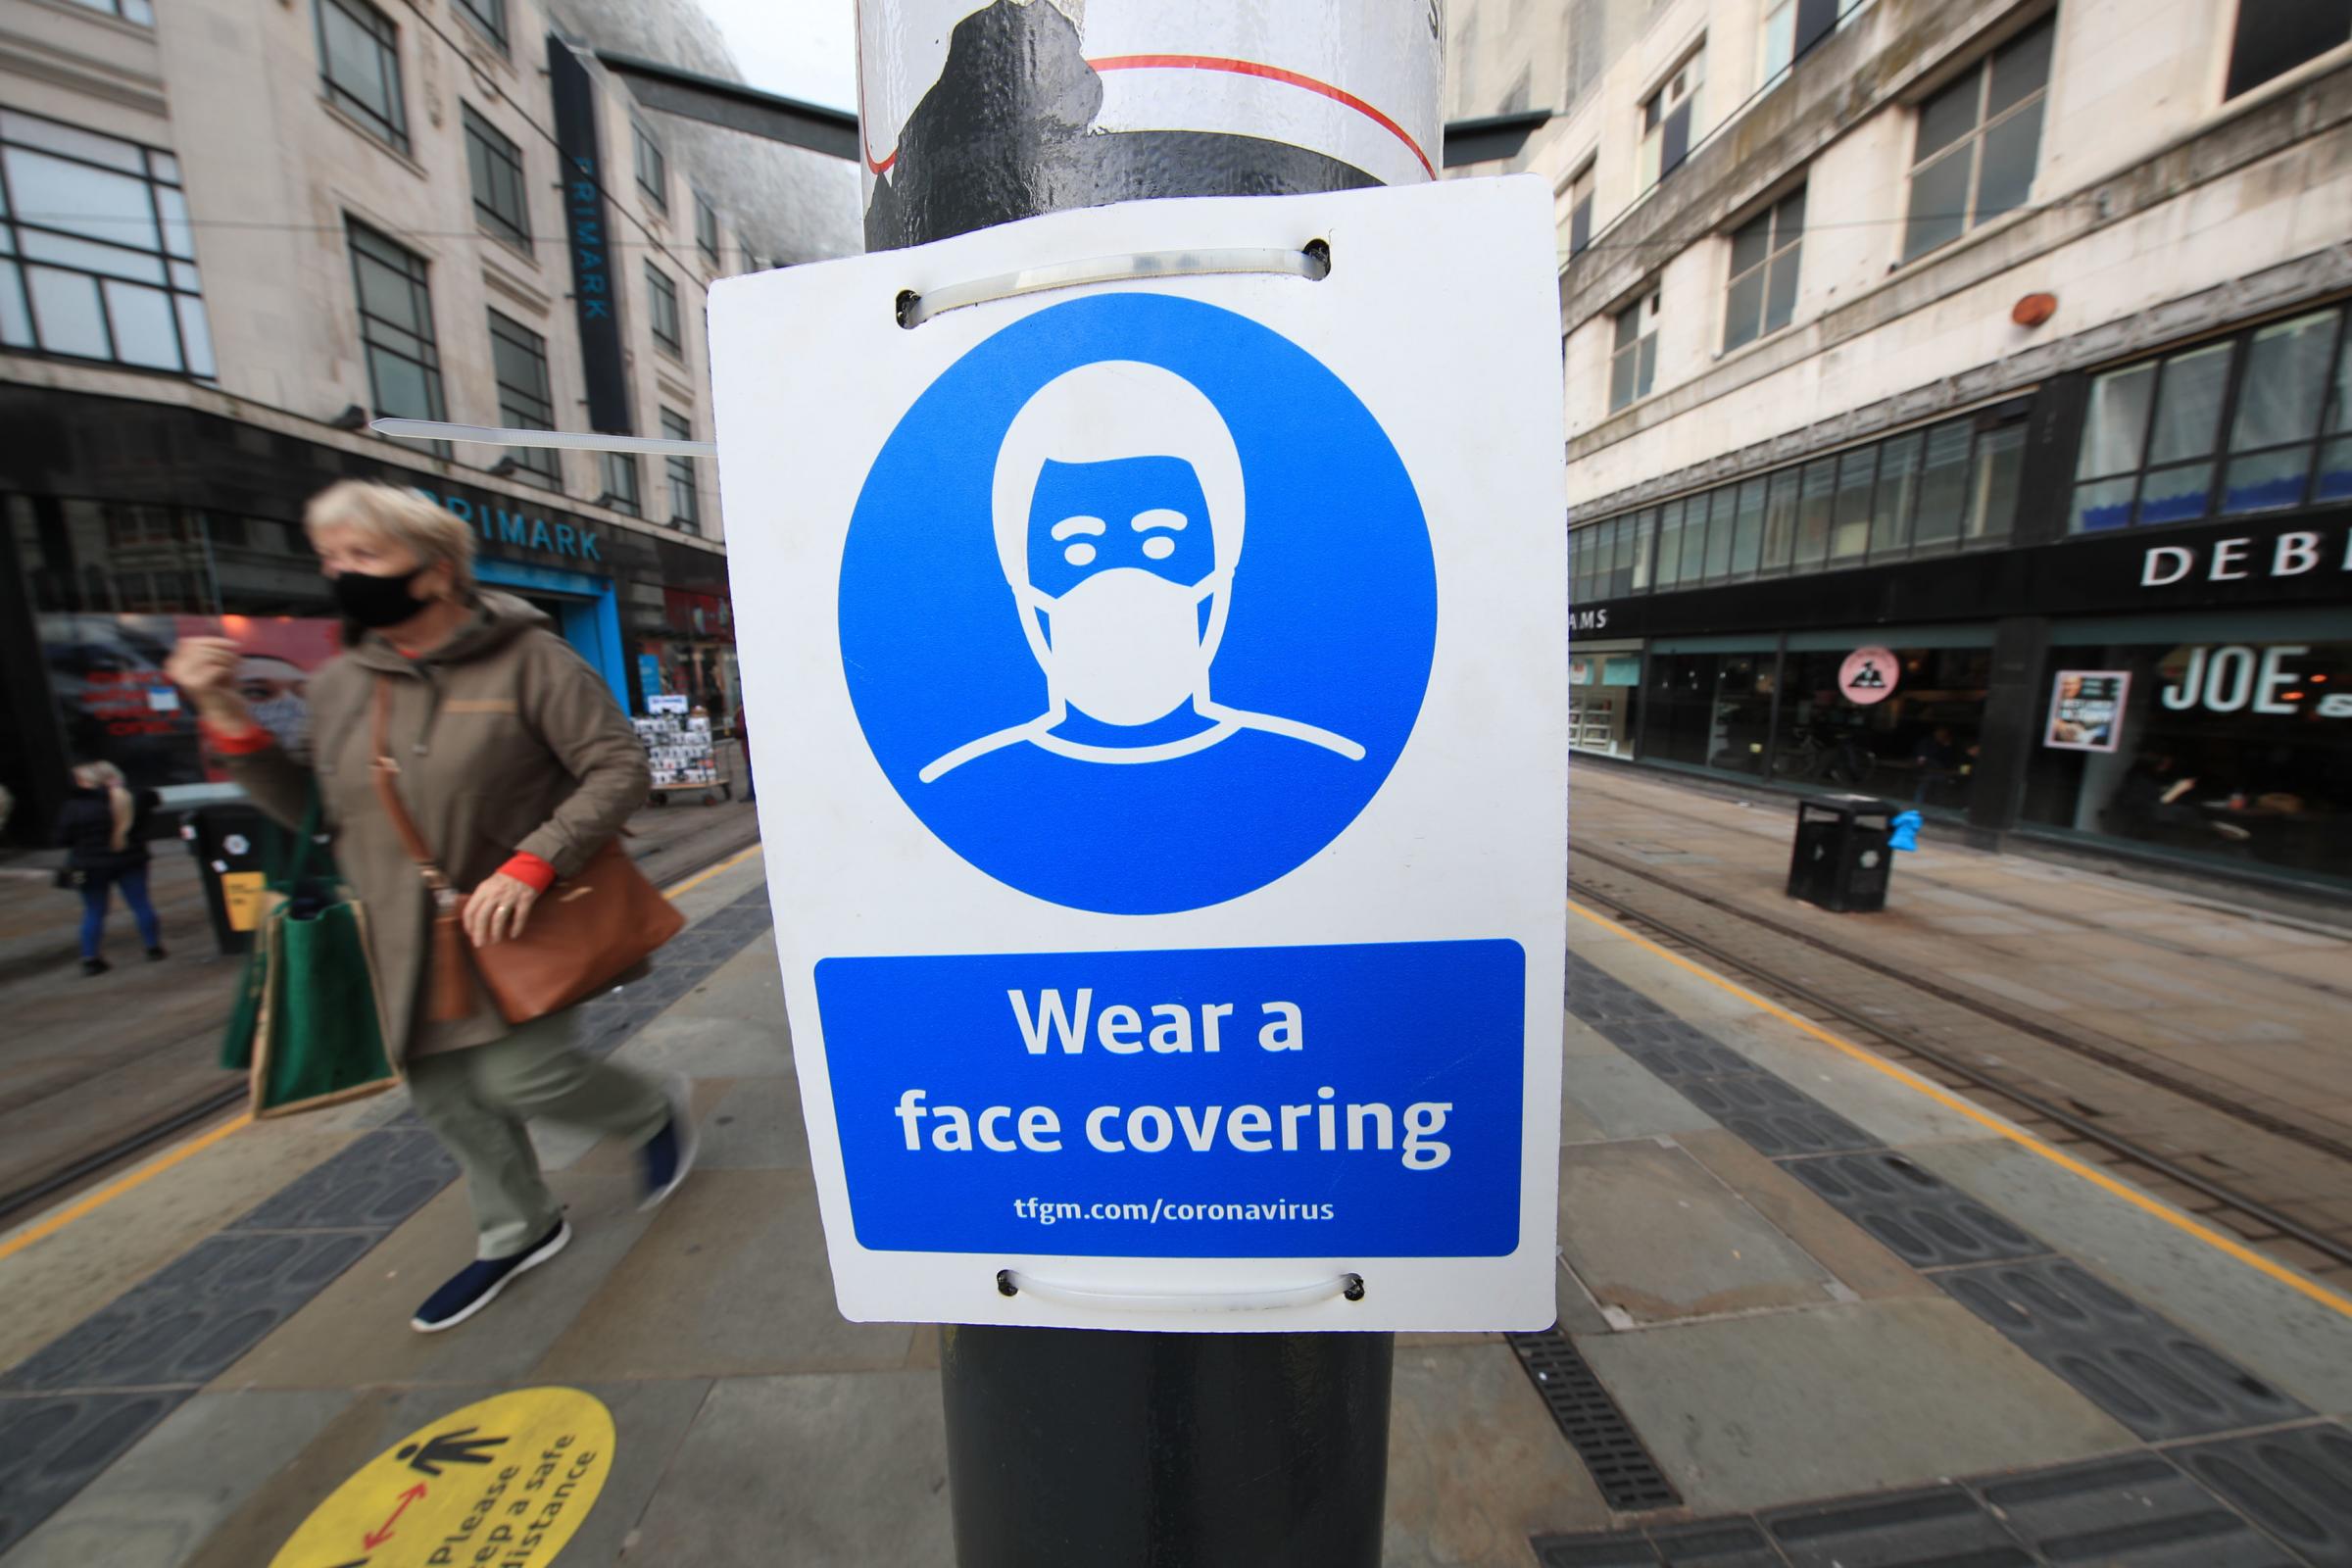 A sign advising on wearing face coverings at a tram stop in Manchester. Cities in northern England and other areas suffering a surge in Covid-19 cases may have pubs and restaurants temporarily closed to combat the spread of the virus..